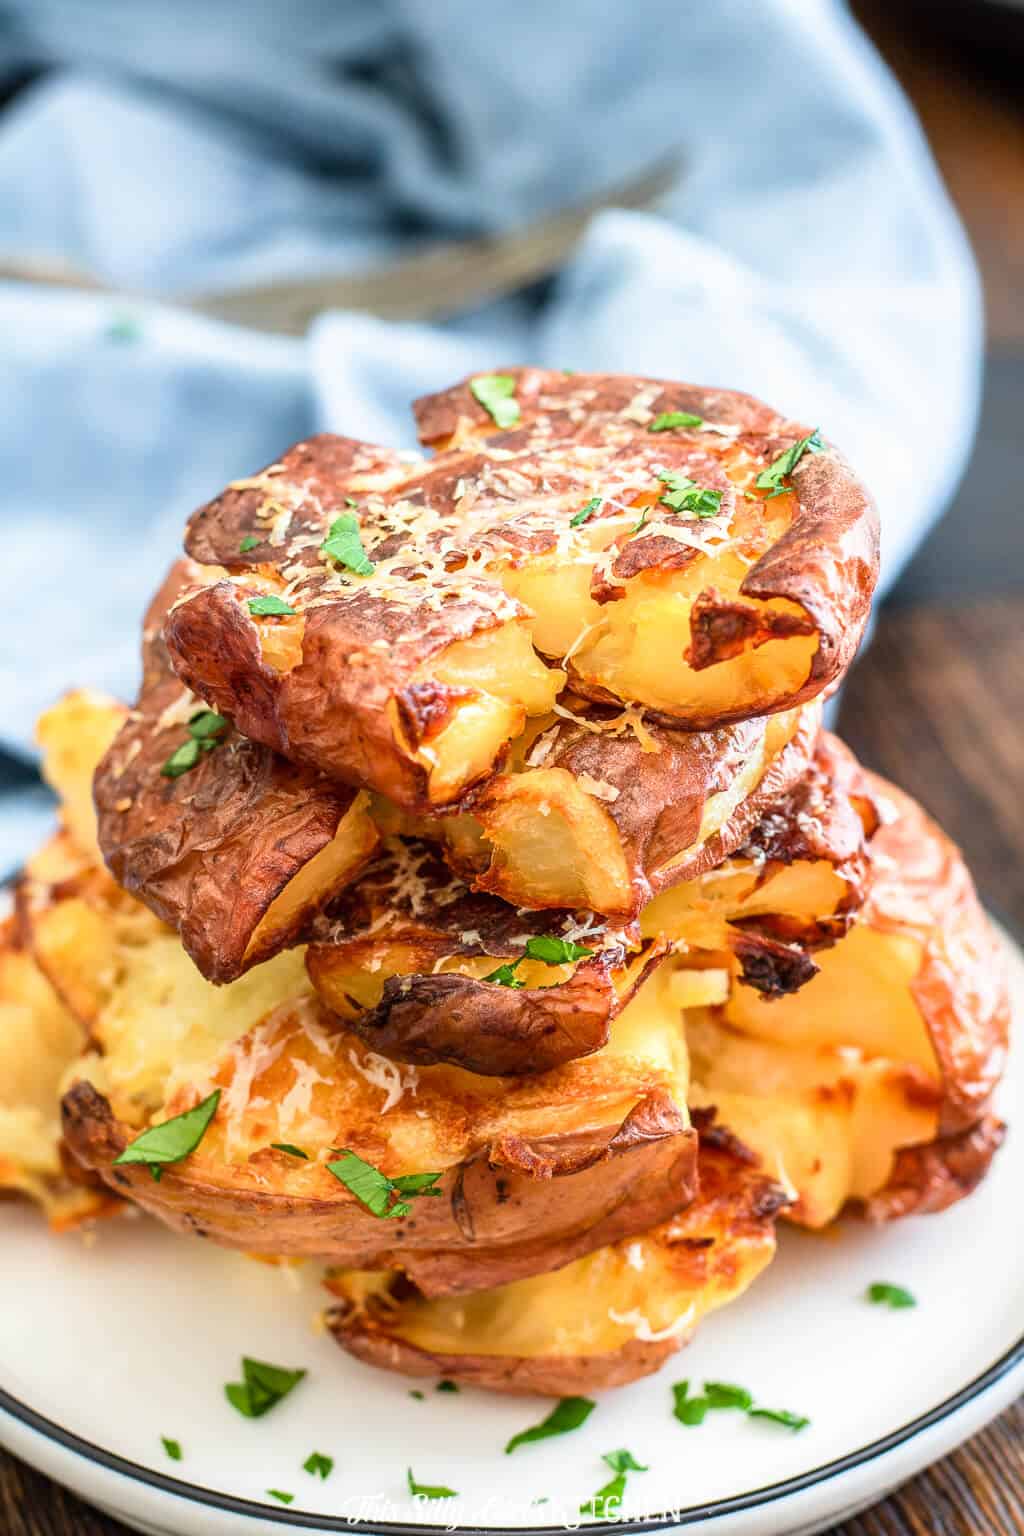 Parmesan Smashed Potatoes served with roasted garlic aioli is an easy and hearty side dish. #recipe from thissillygirlskitchen.com #potatoes #sidedish #potatosidedish #smashedpotatoes #parmesanpotatoes #garlic #garlicaioli